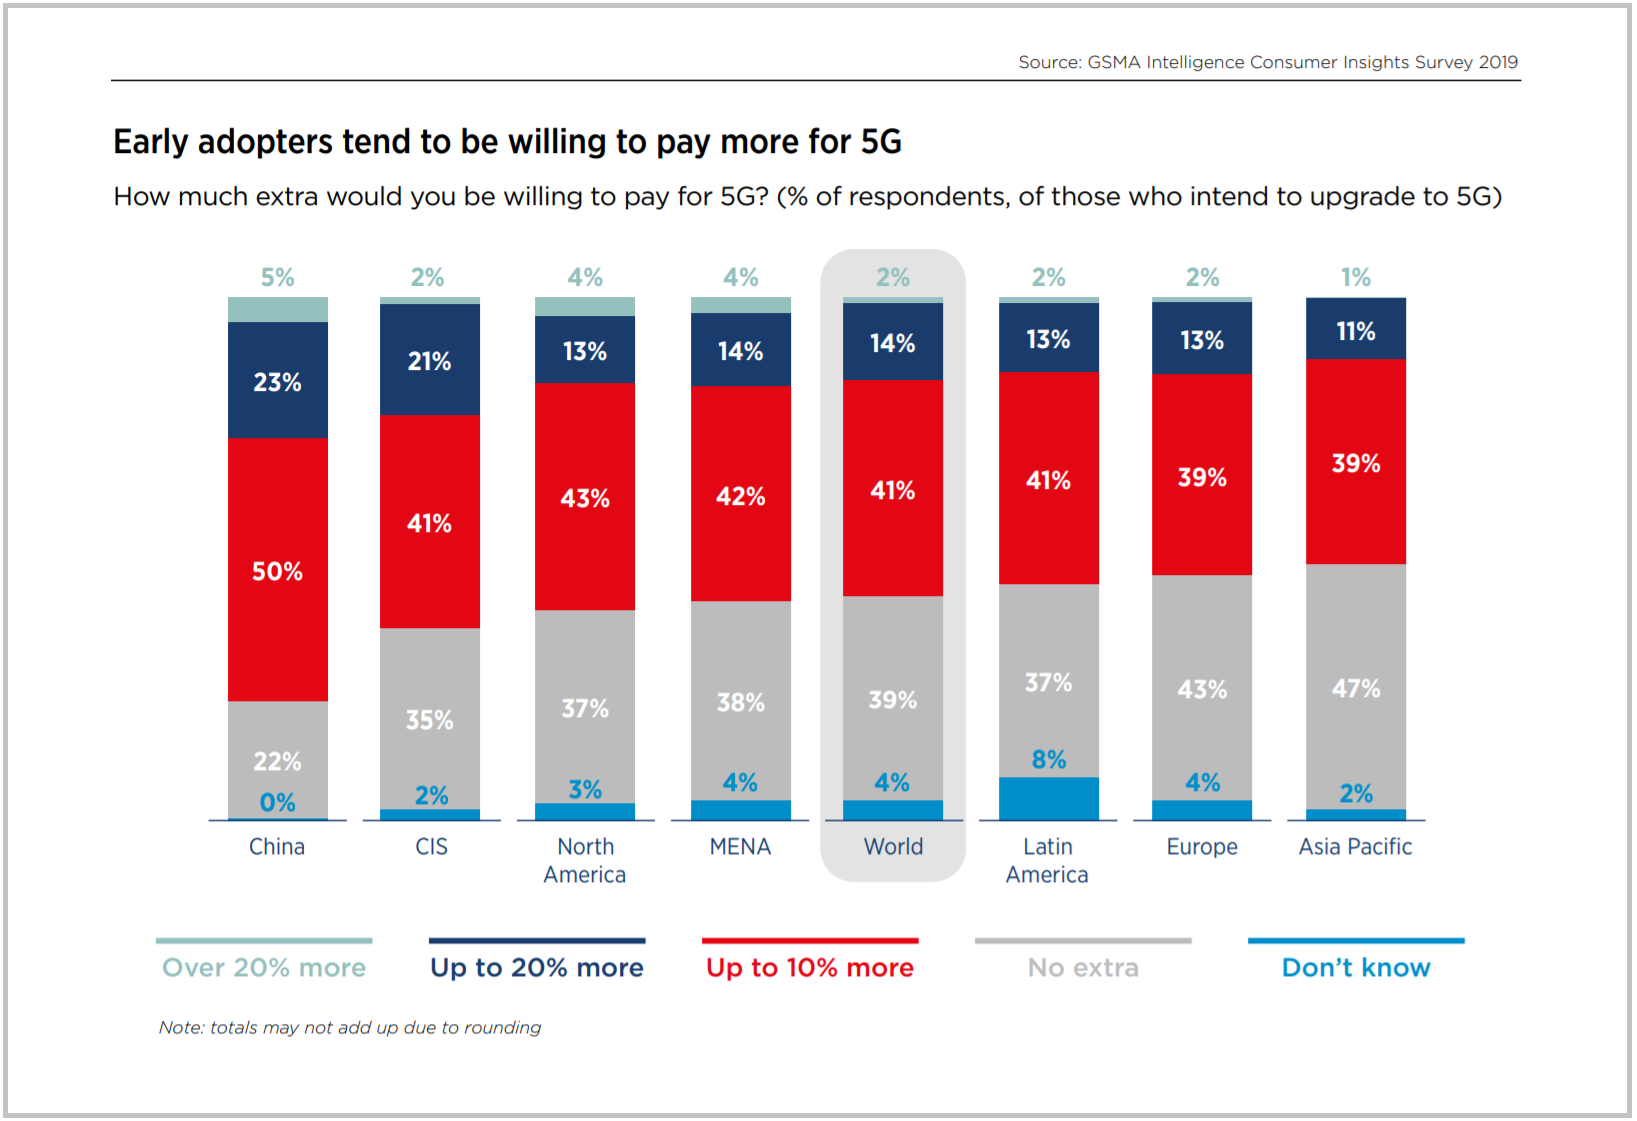 Early adopters tend to be willing to pay more for 5G